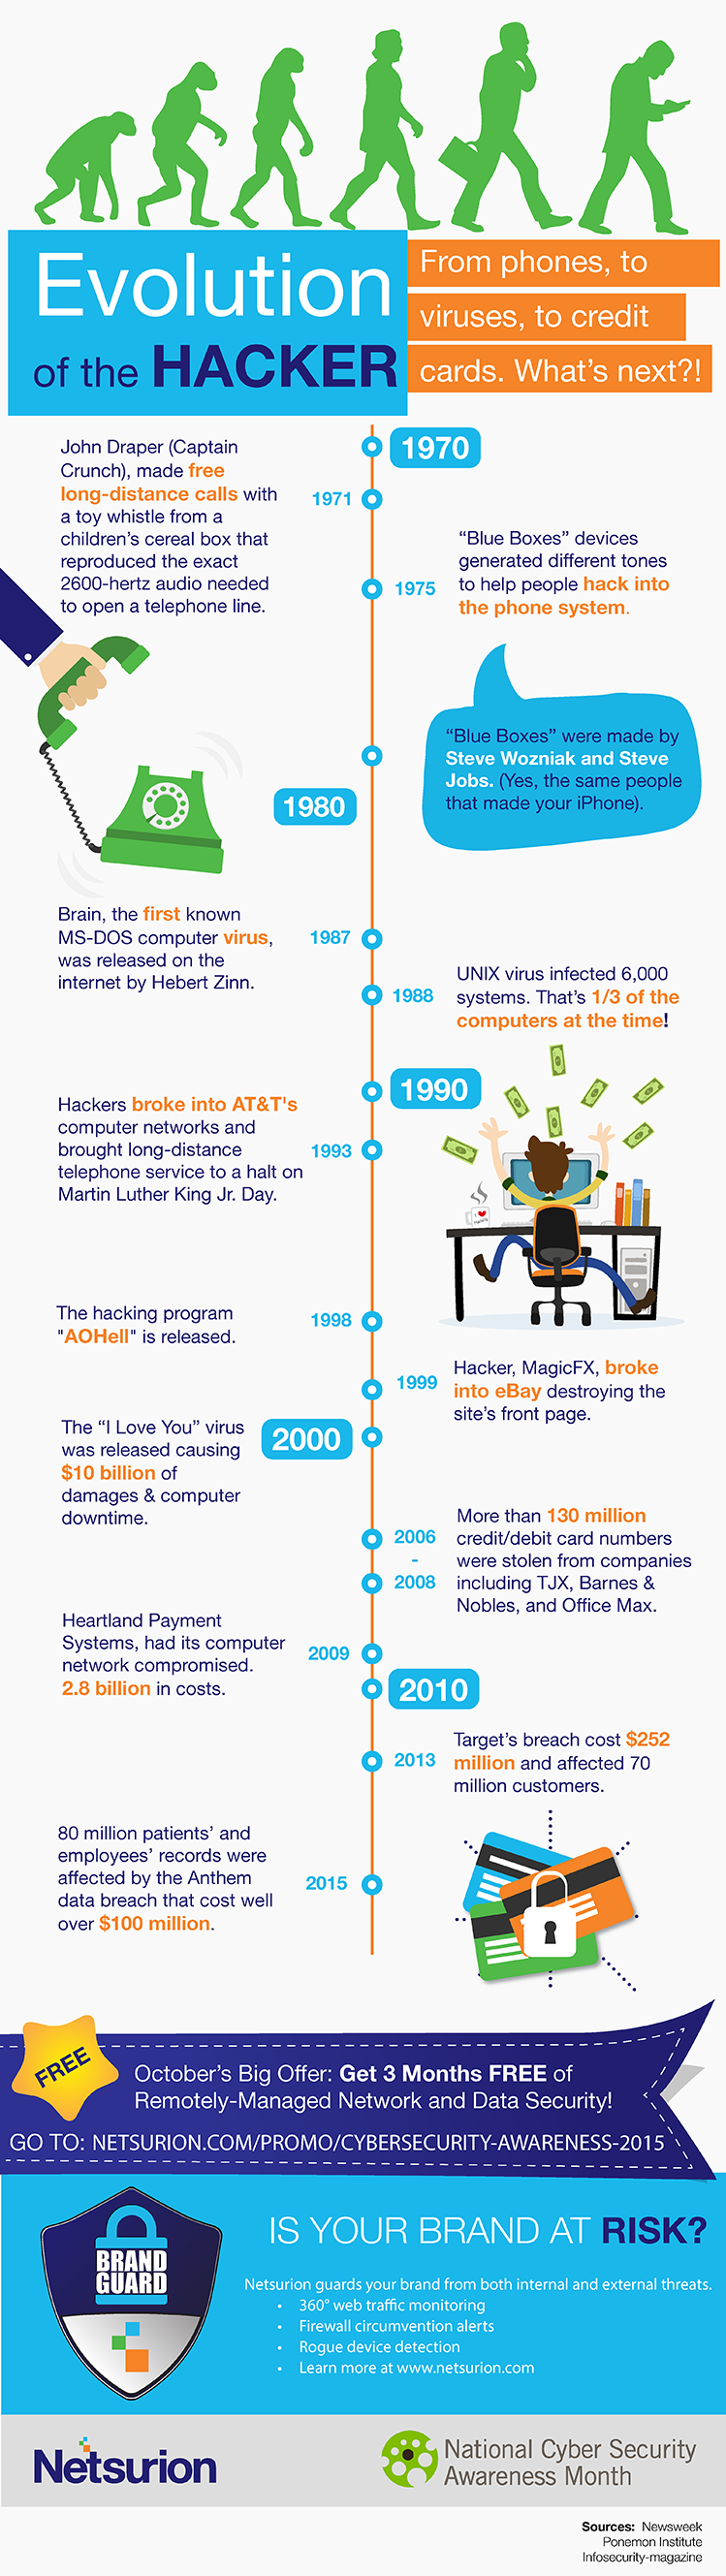 evolution of the hacker infographic